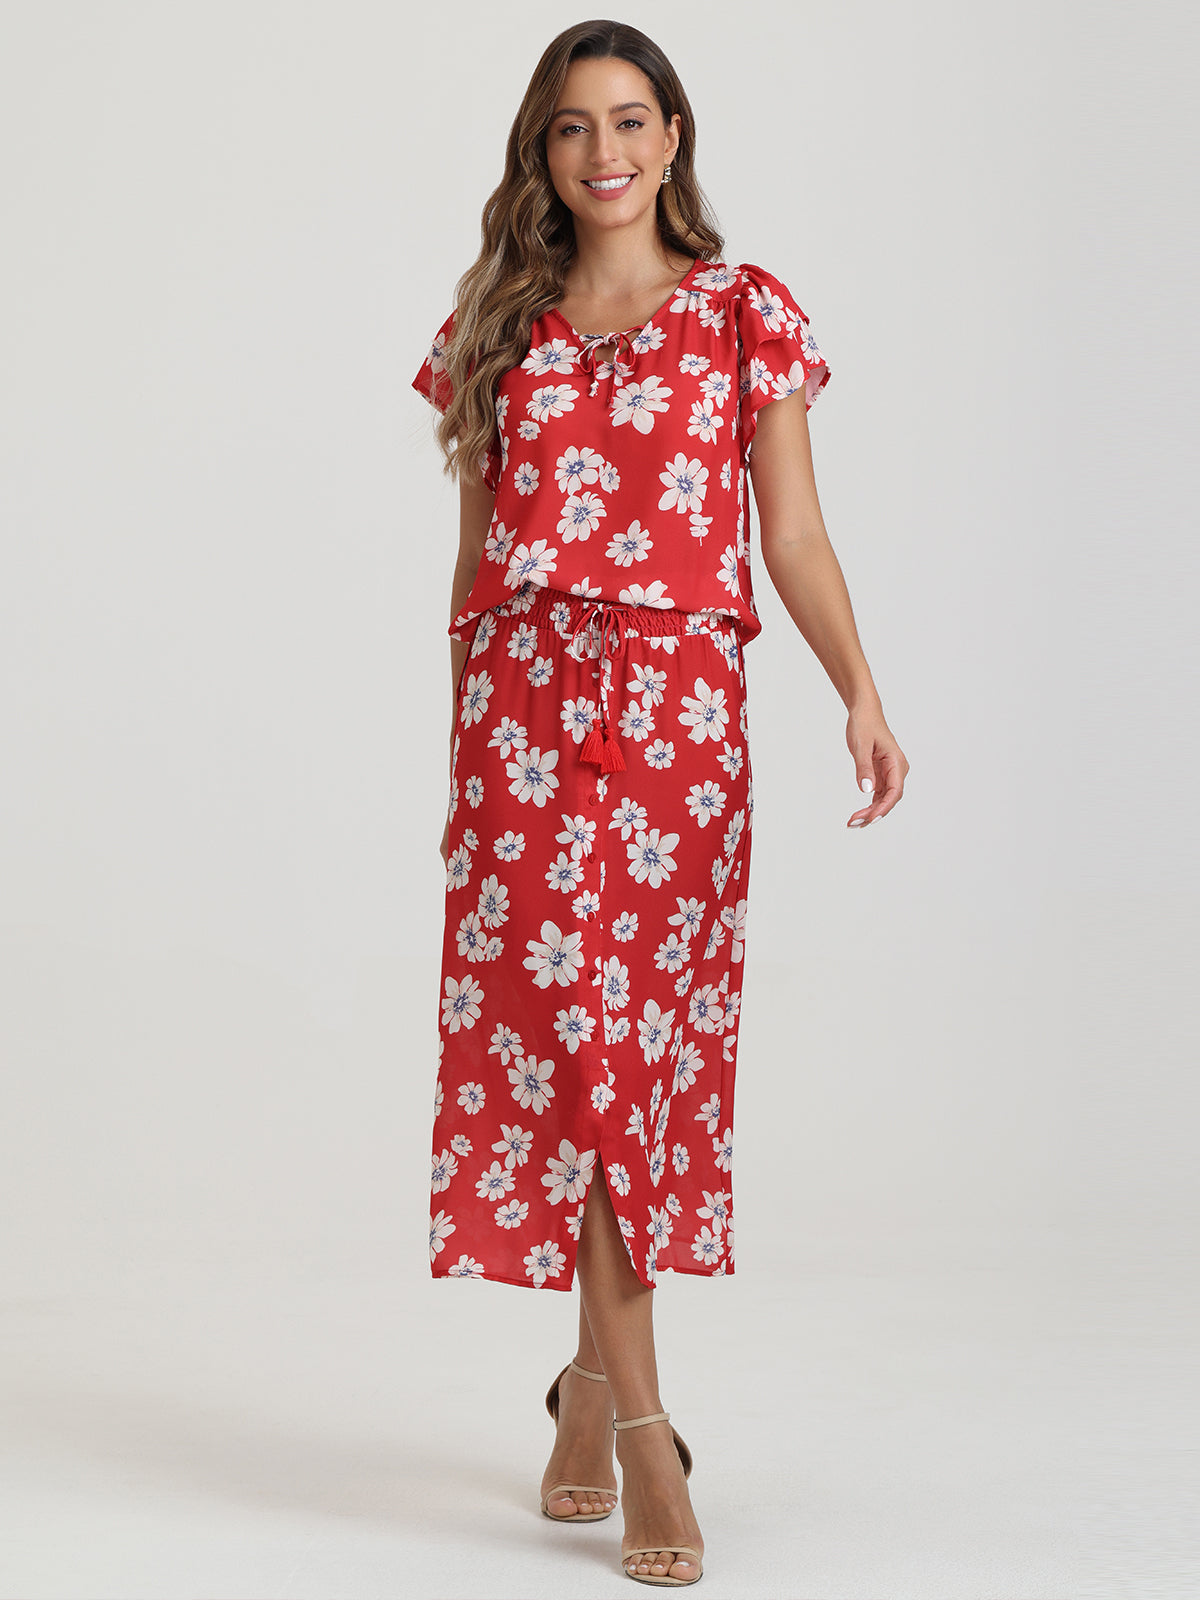 Floral Button Front Midi Skirt